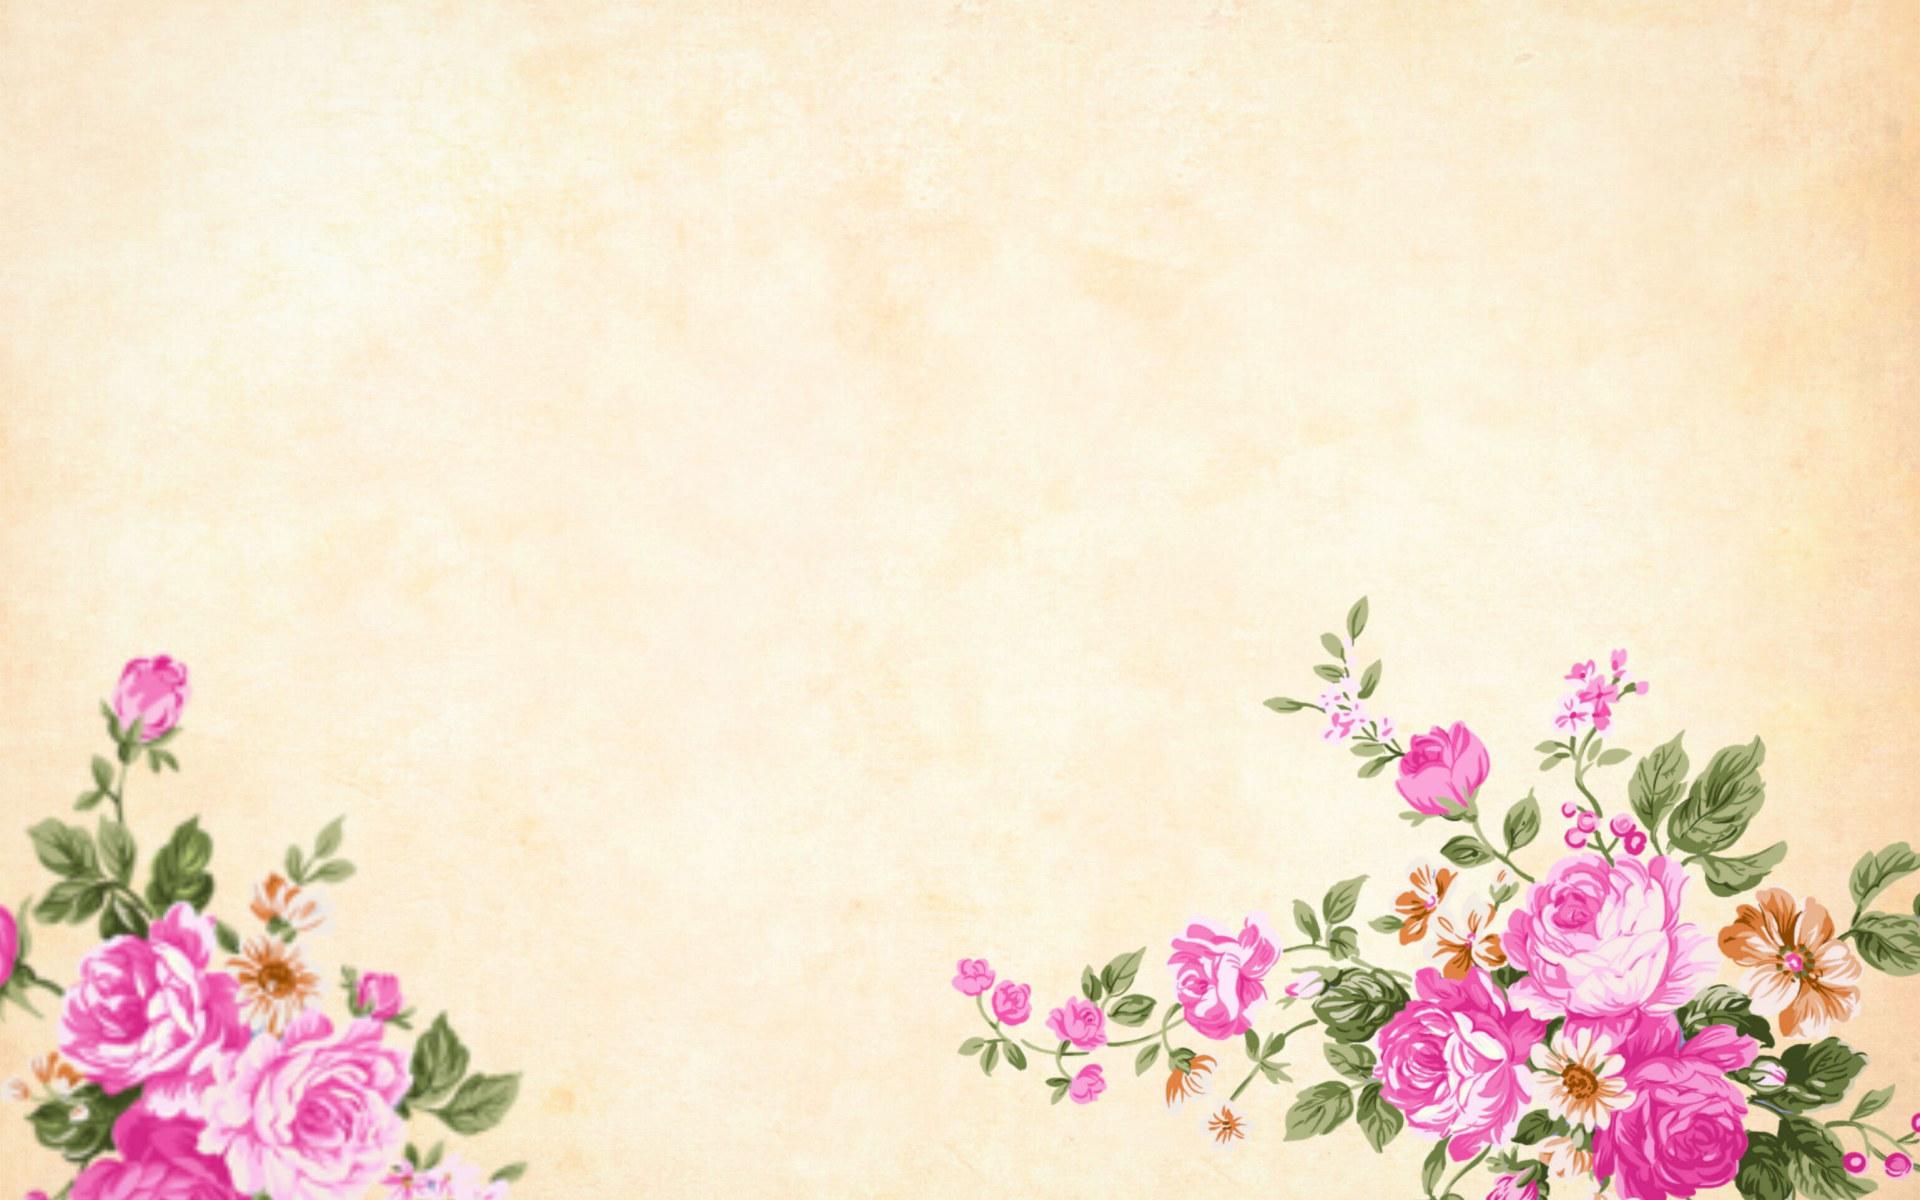 Floral Border Wallpapers - Top Free Floral Border Backgrounds ...